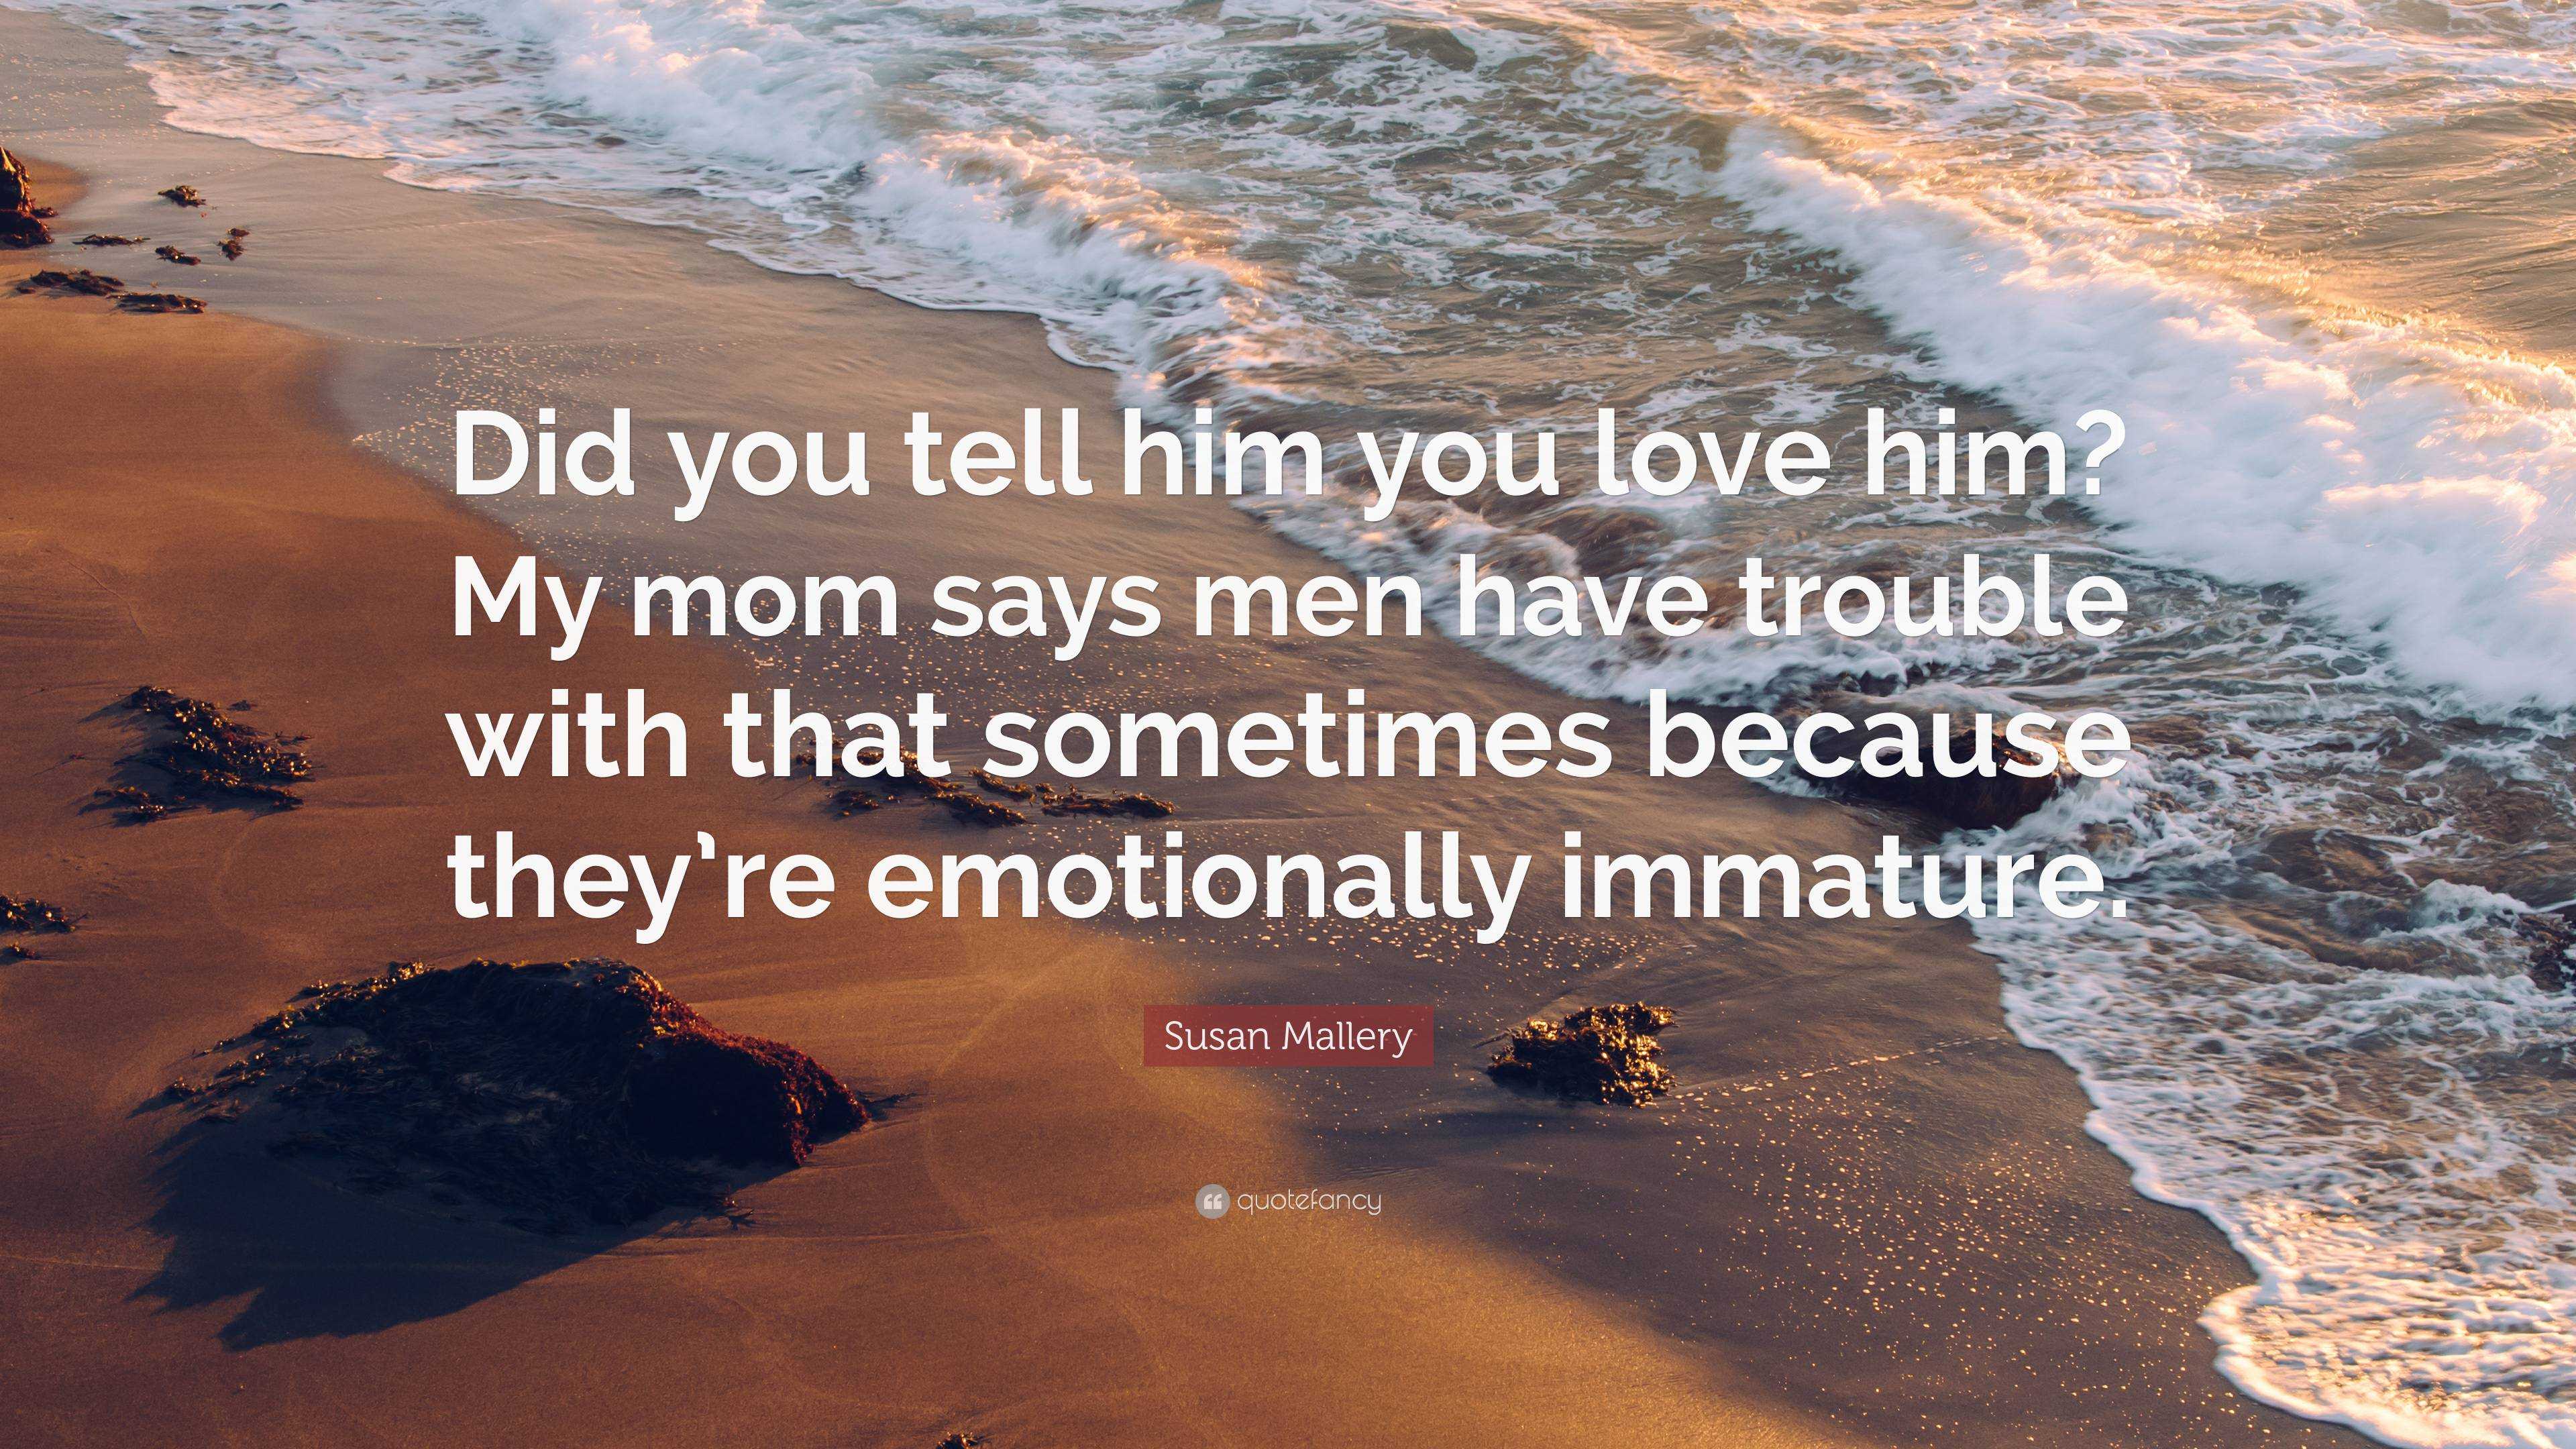 Susan Mallery Quote: “Did you tell him you love him? My mom says men ...